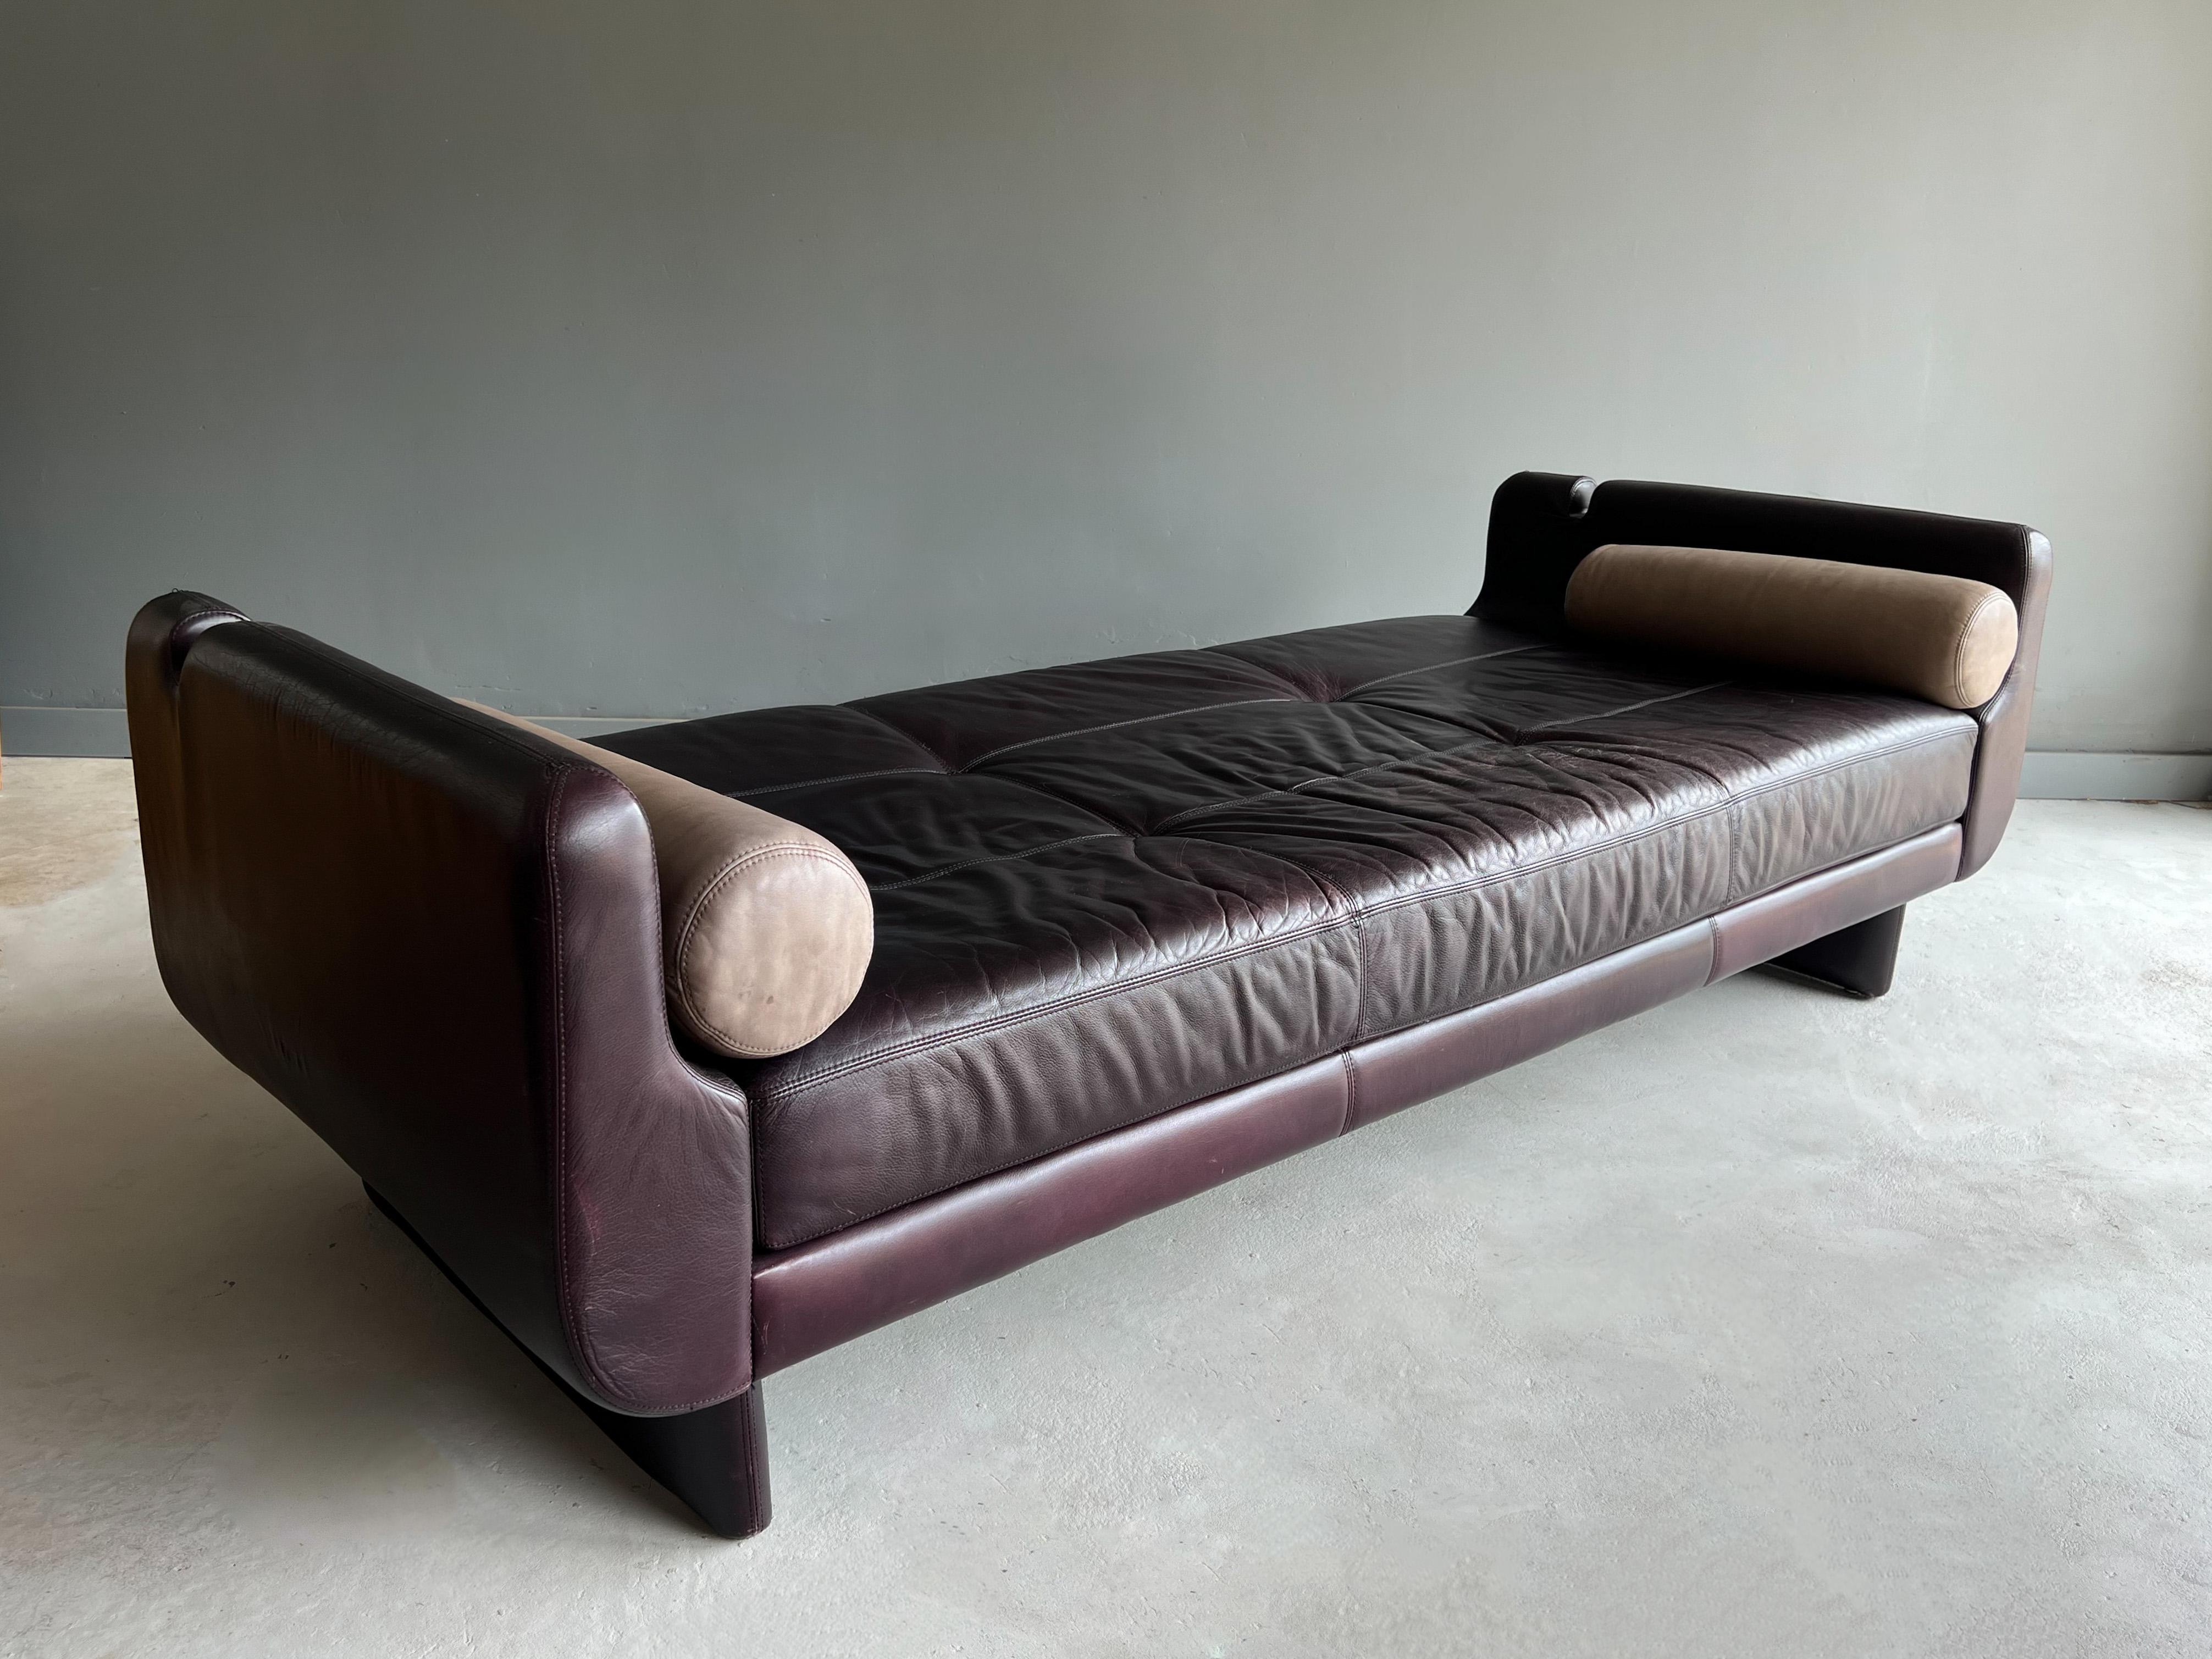 Contemporary Beautiful “Matinee” Sofa / Daybed by Vladimir Kagan for American Leather